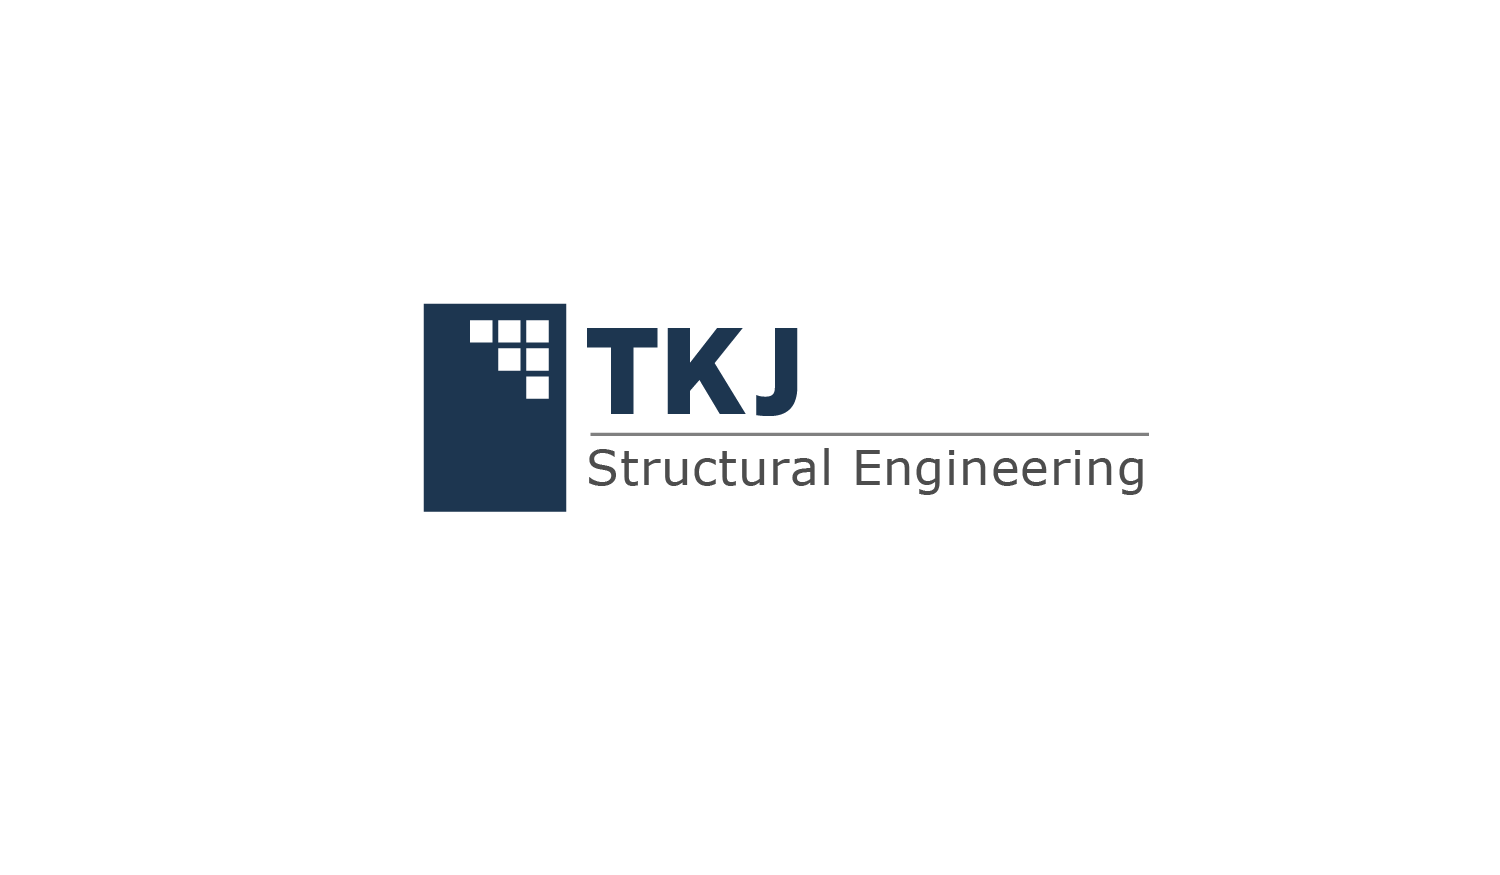 Professional Structural Engineer Logo - Professional, Serious, Civil Engineer Logo Design for TKJ Structural